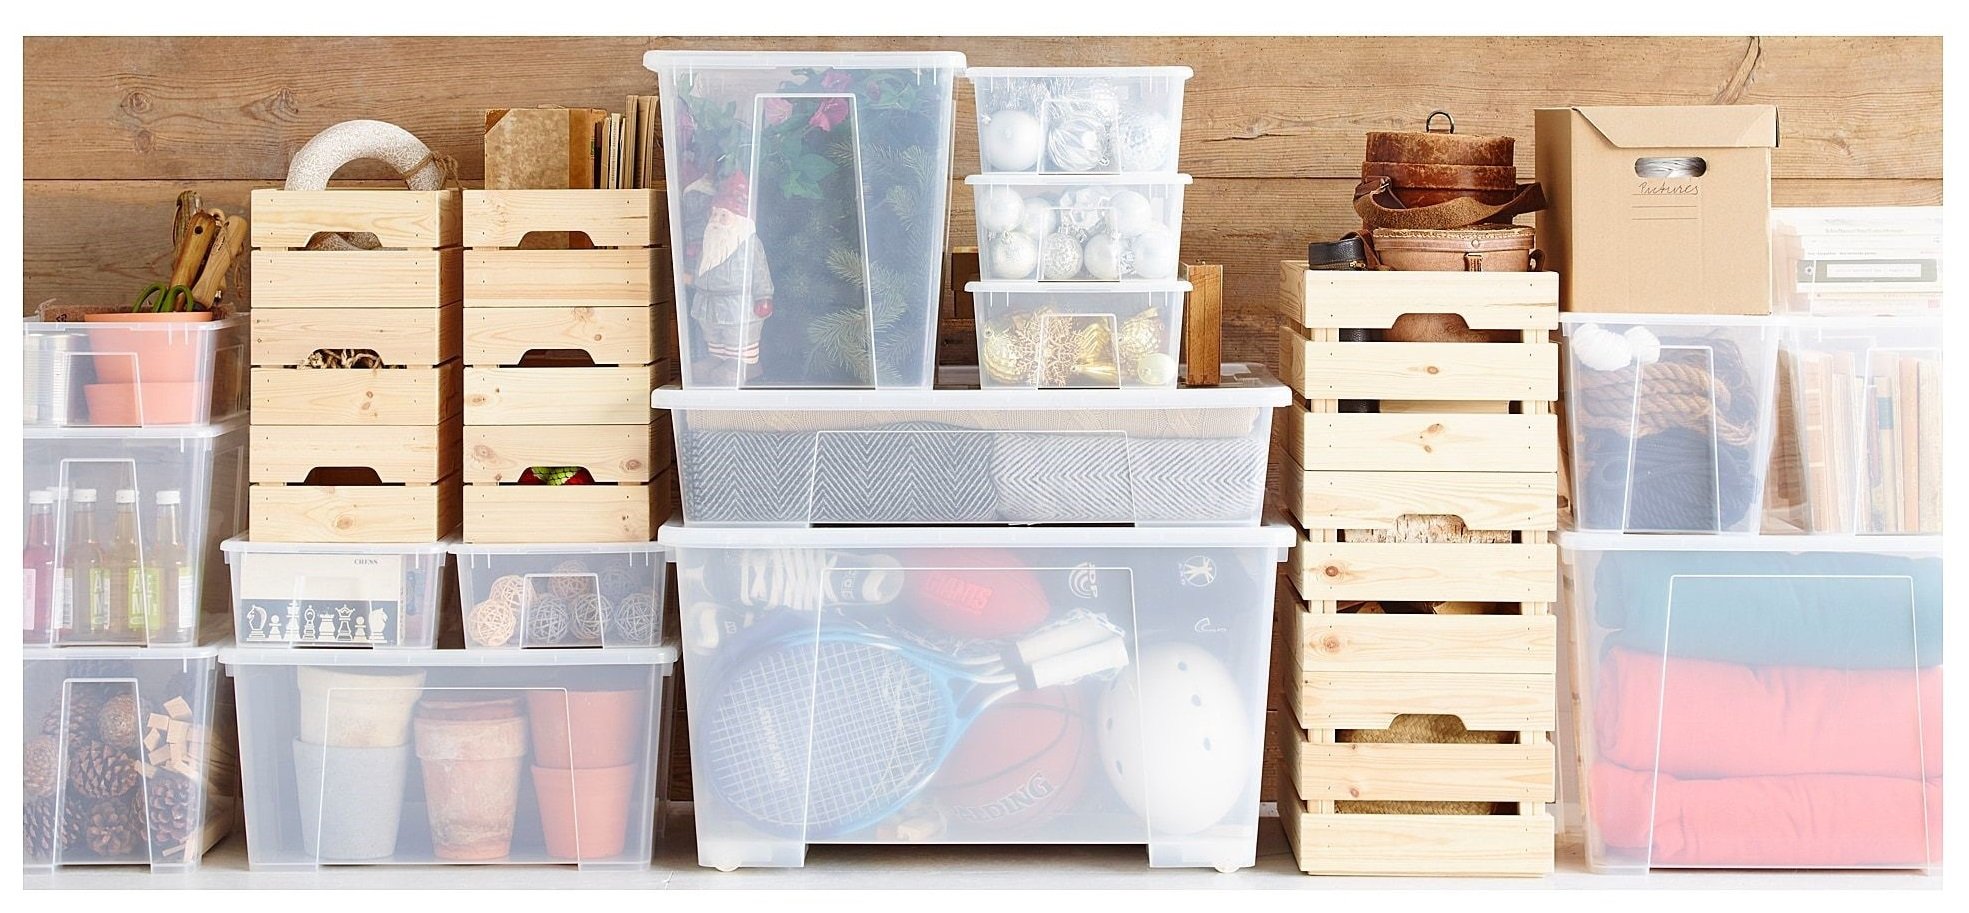 Best plastic containers for storage 